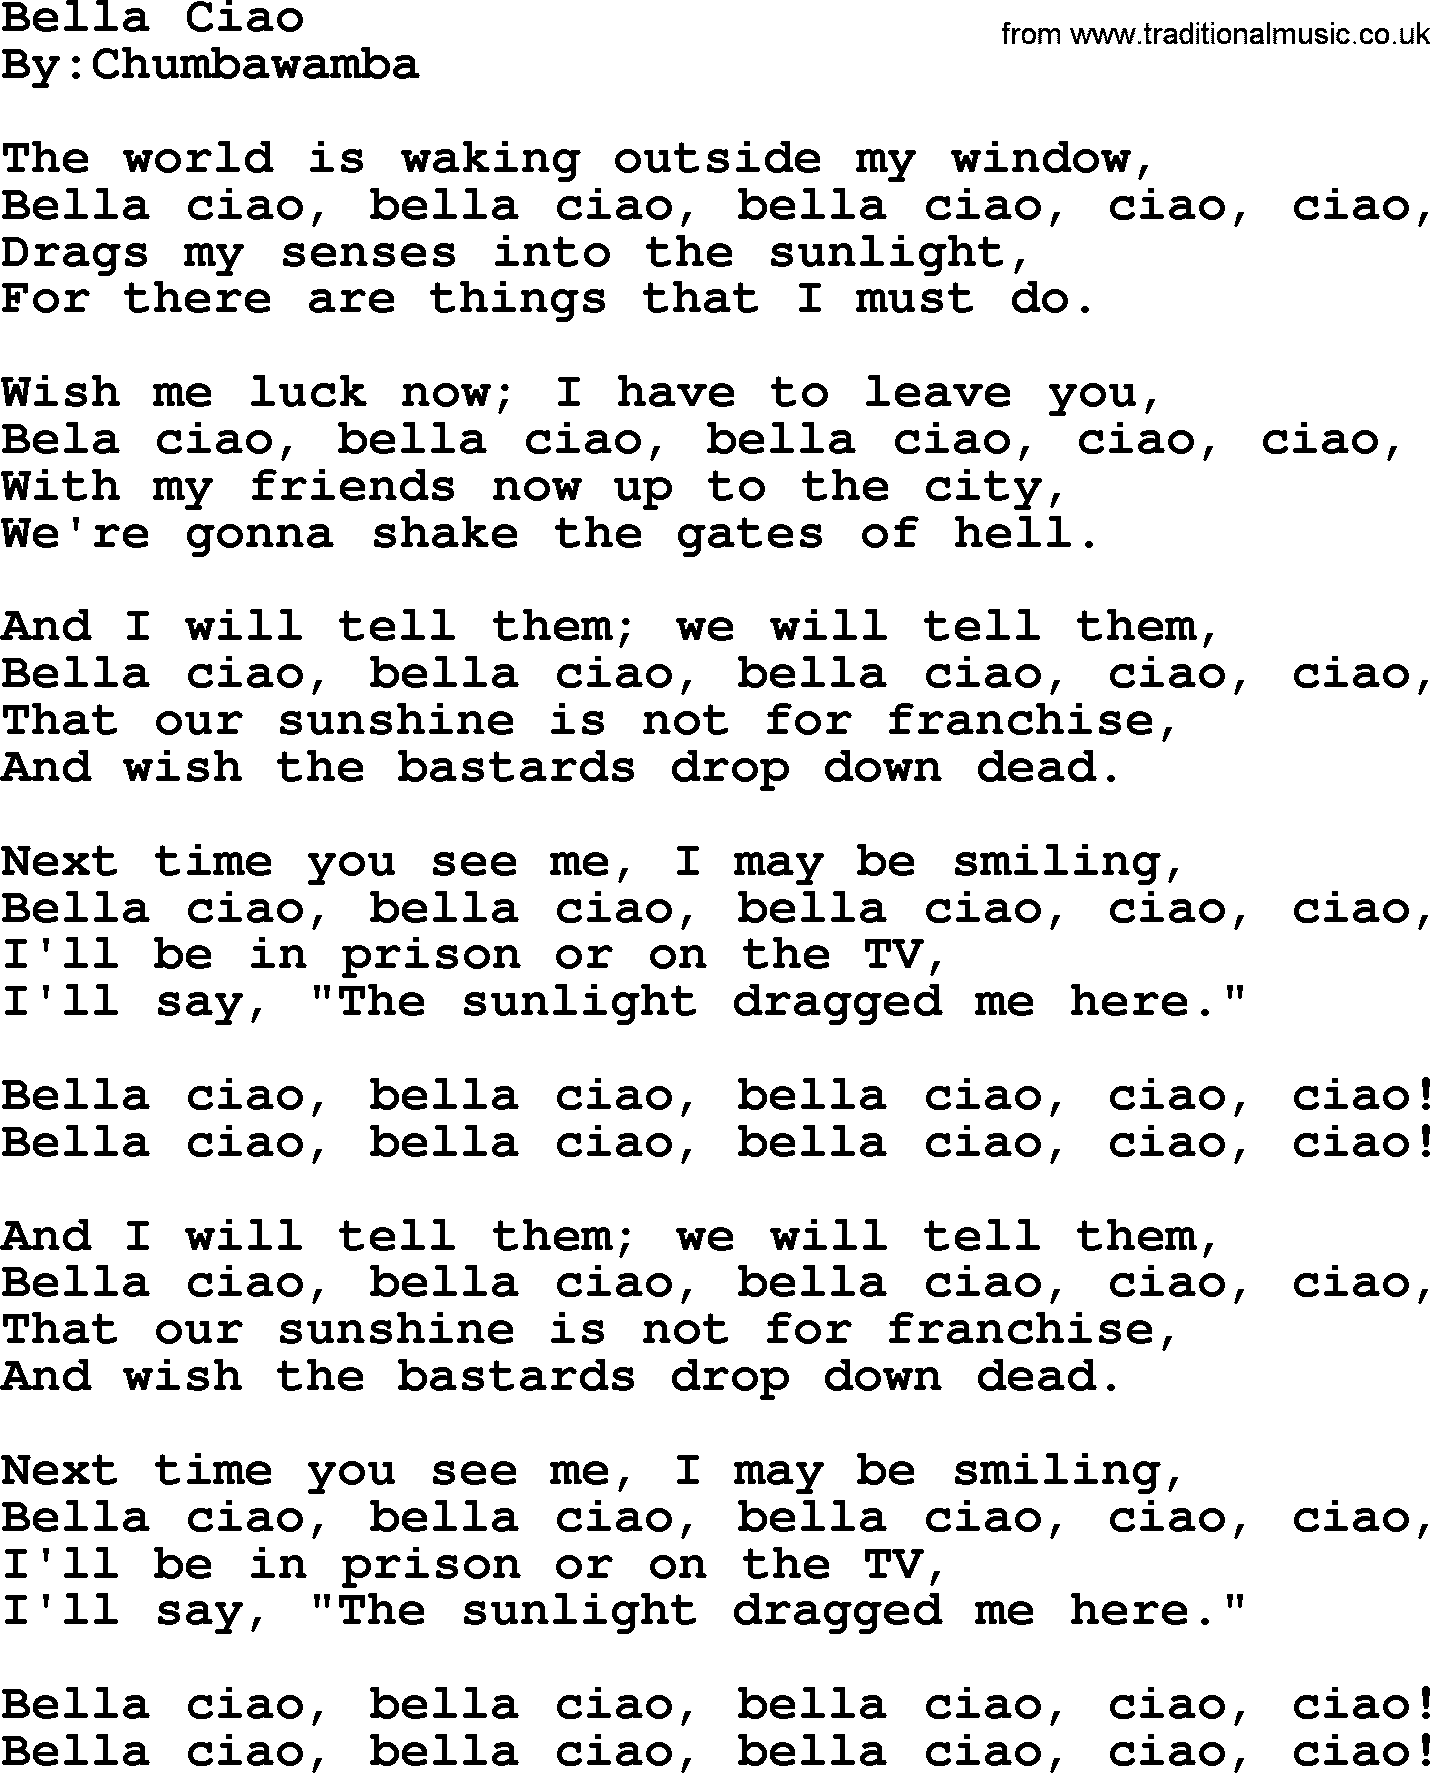 Political, Solidarity, Workers or Union song: Bella Ciao, lyrics